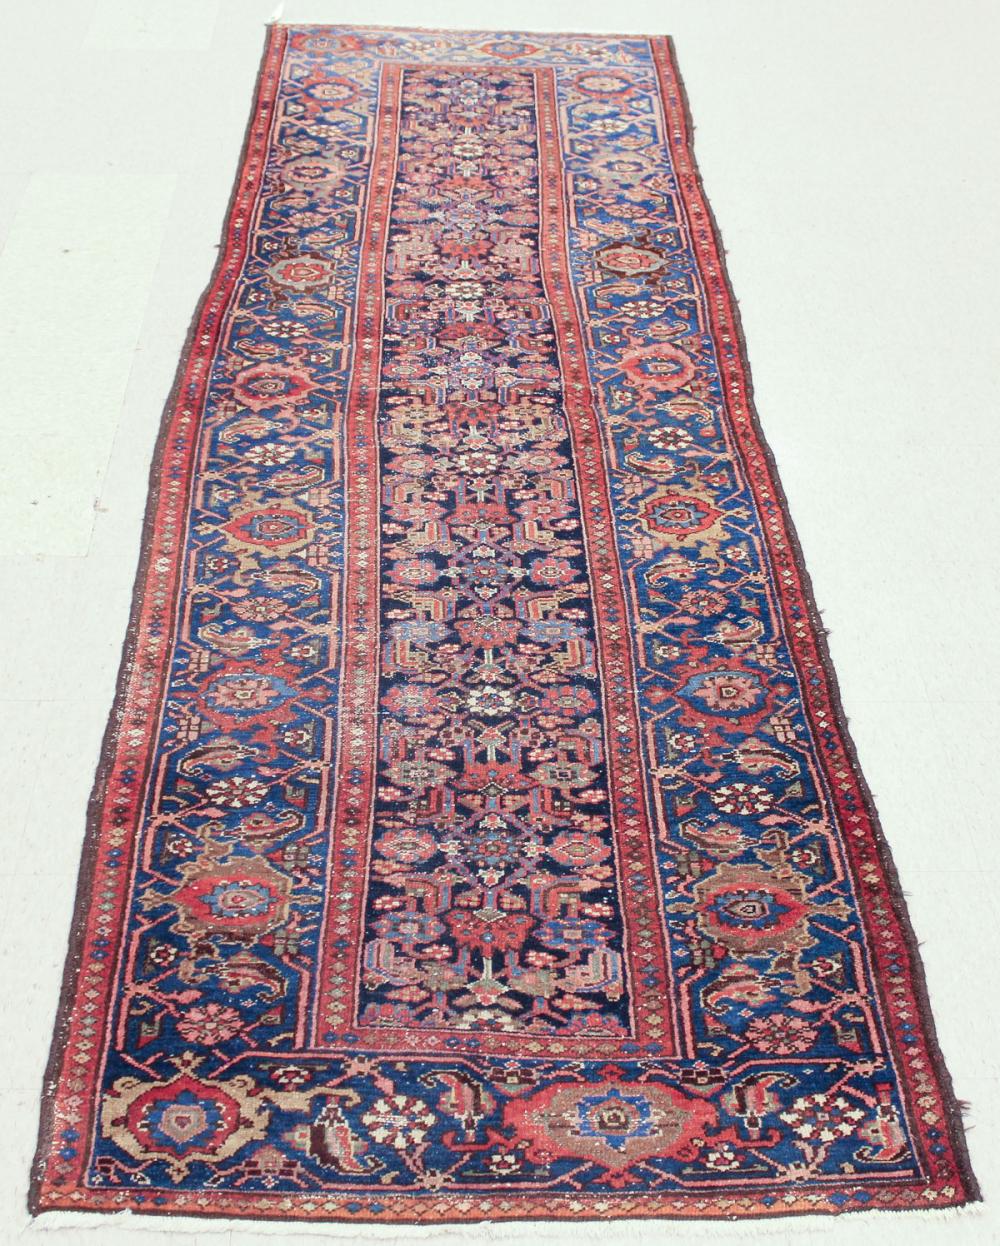 ANTIQUE PERSIAN TRIBAL AREA RUG  31439a